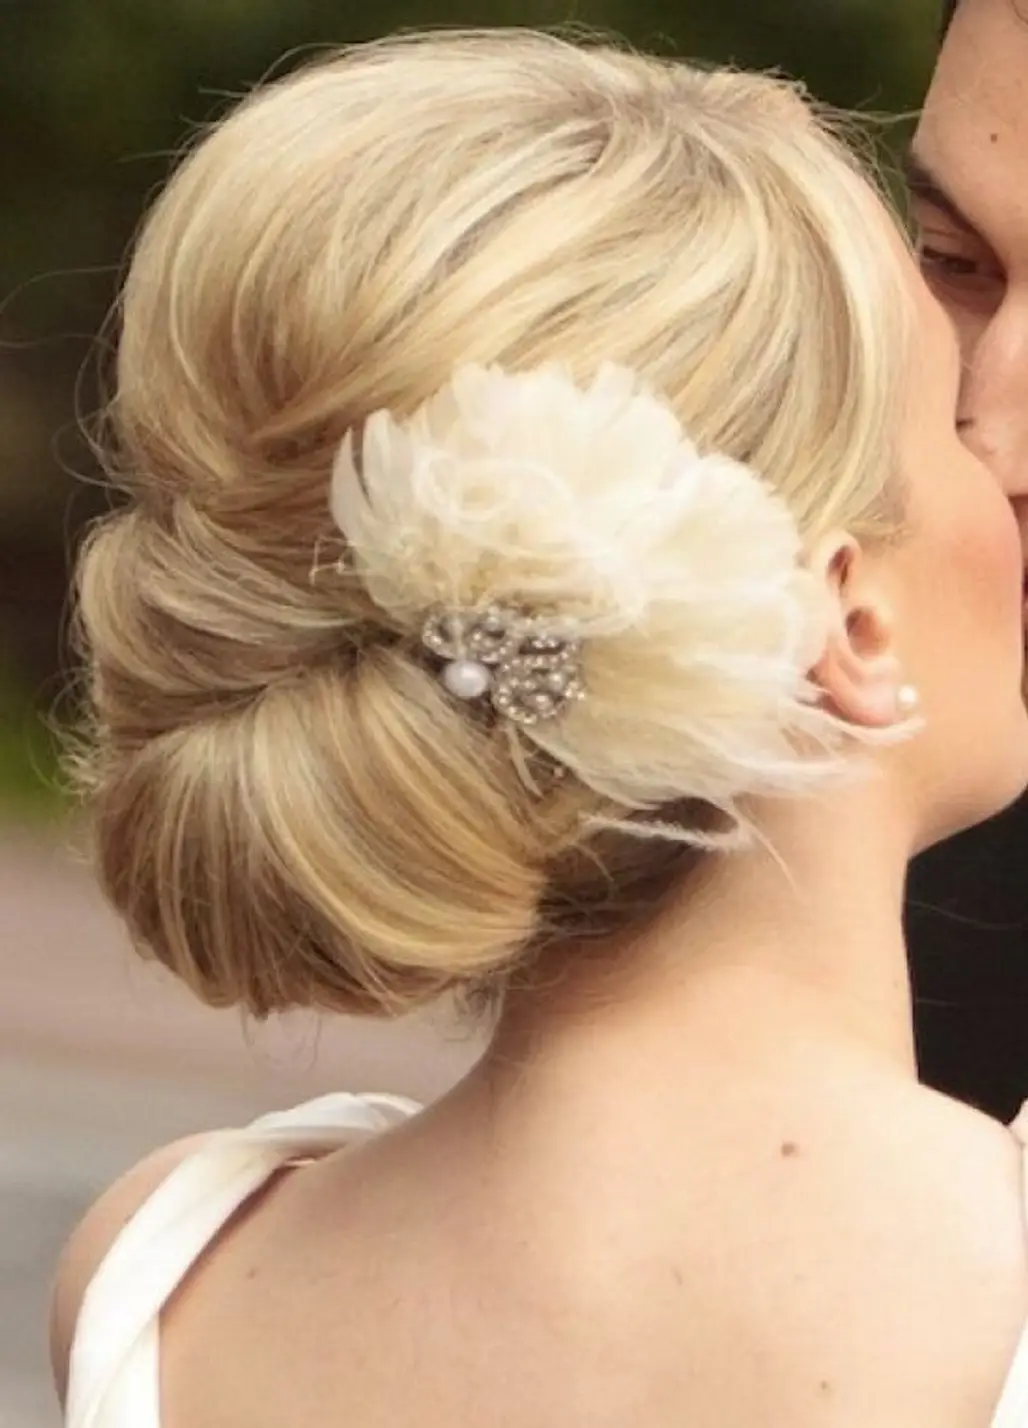 hair,face,blond,bridal accessory,hairstyle,